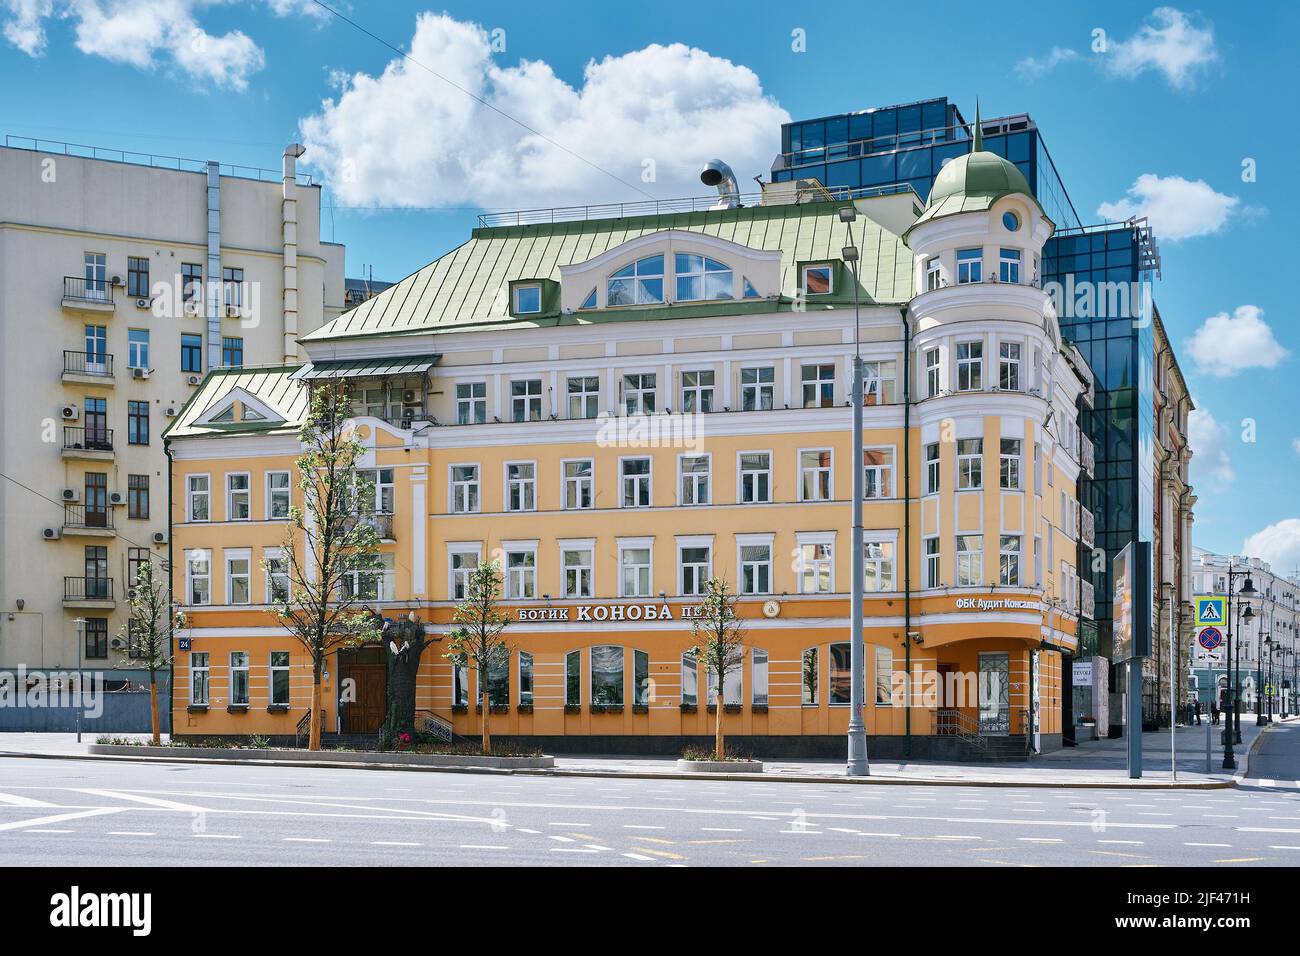 Sadovaya-Spasskaya Street, view of a modern business center, built in 1999 in the form of a mansion: Moscow, Russia - June 04, 2022 Stock Photo